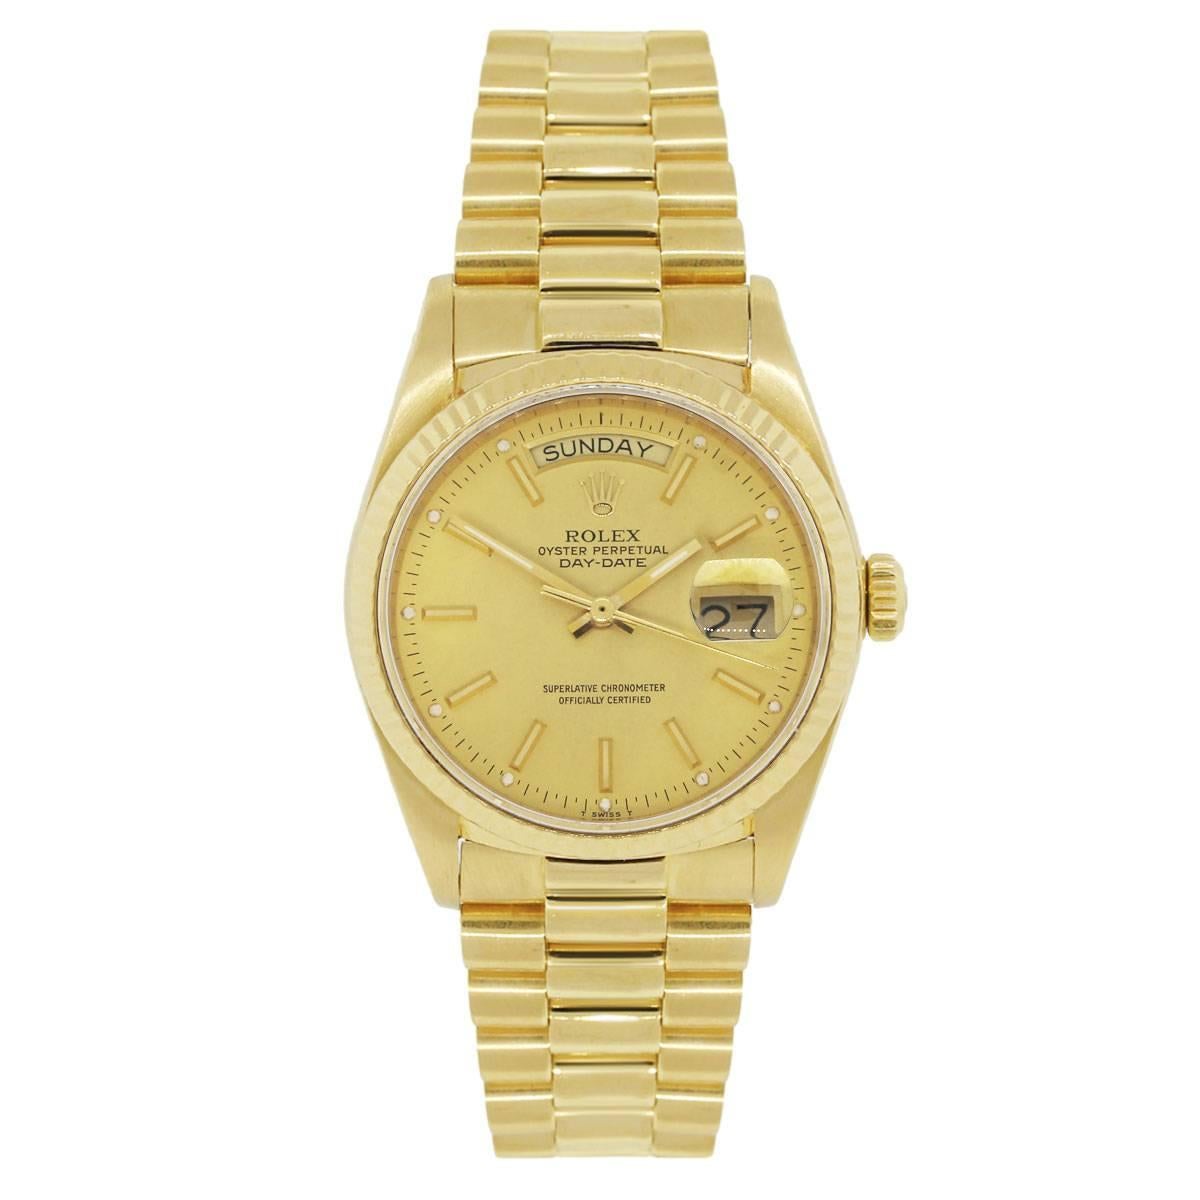 Brand: Rolex
MPN: 18038
Model: Day Date
Case Material: 18k yellow gold
Case Diameter: 36mm
Crystal: Scratch resistant sapphire
Bezel: 18k yellow gold fluted bezel (factory)
Dial: Champagne stick dial with gold hour markers and hands, day and date